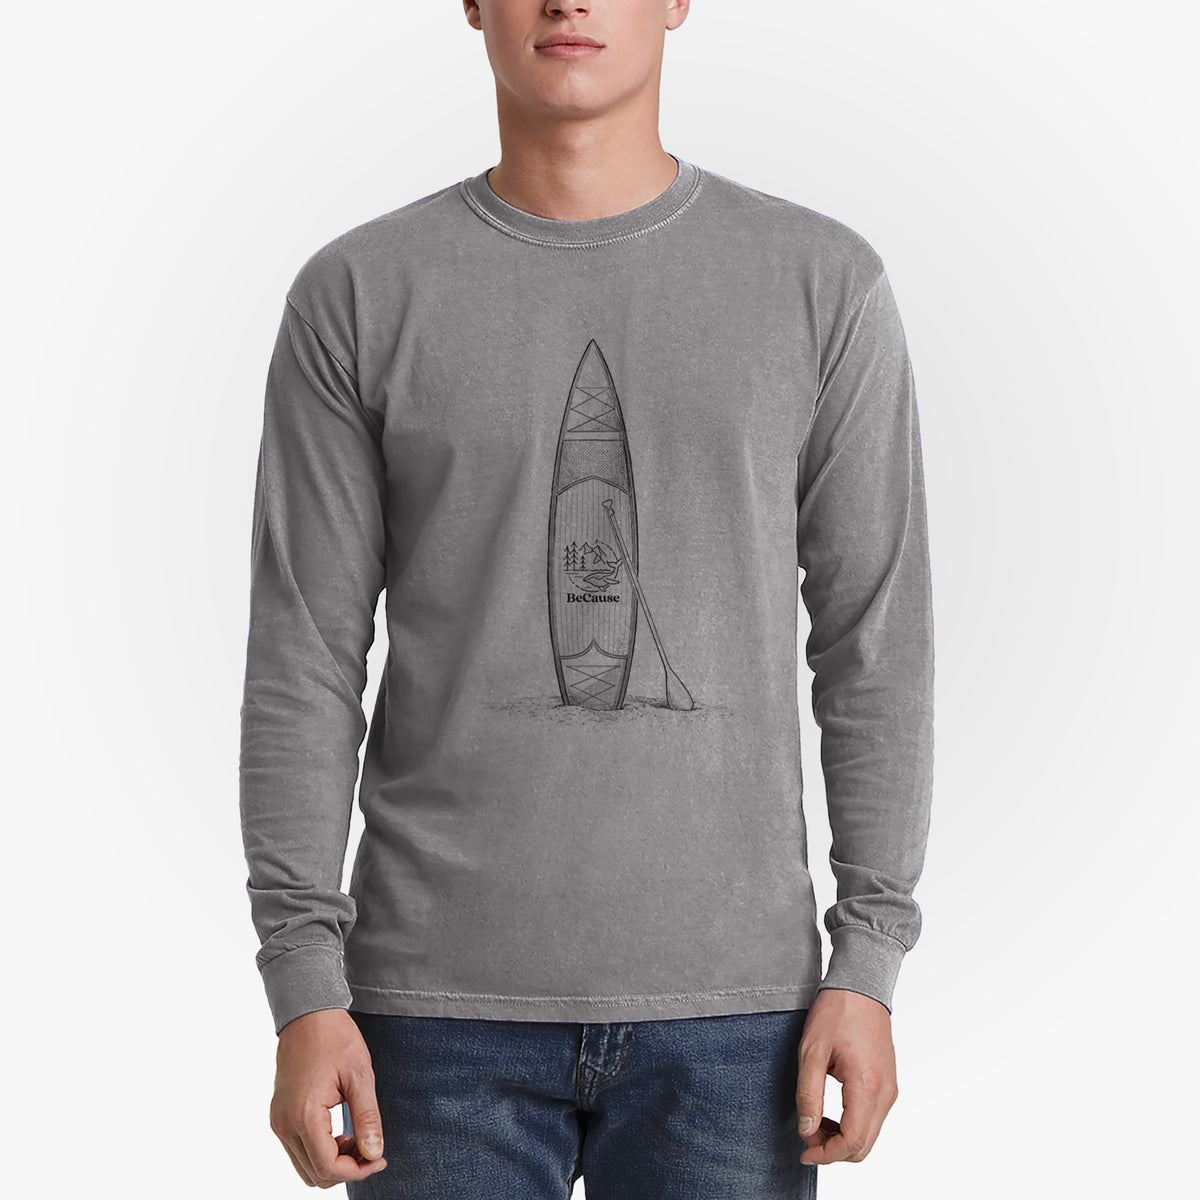 Stand-up Paddle Board - Heavyweight 100% Cotton Long Sleeve